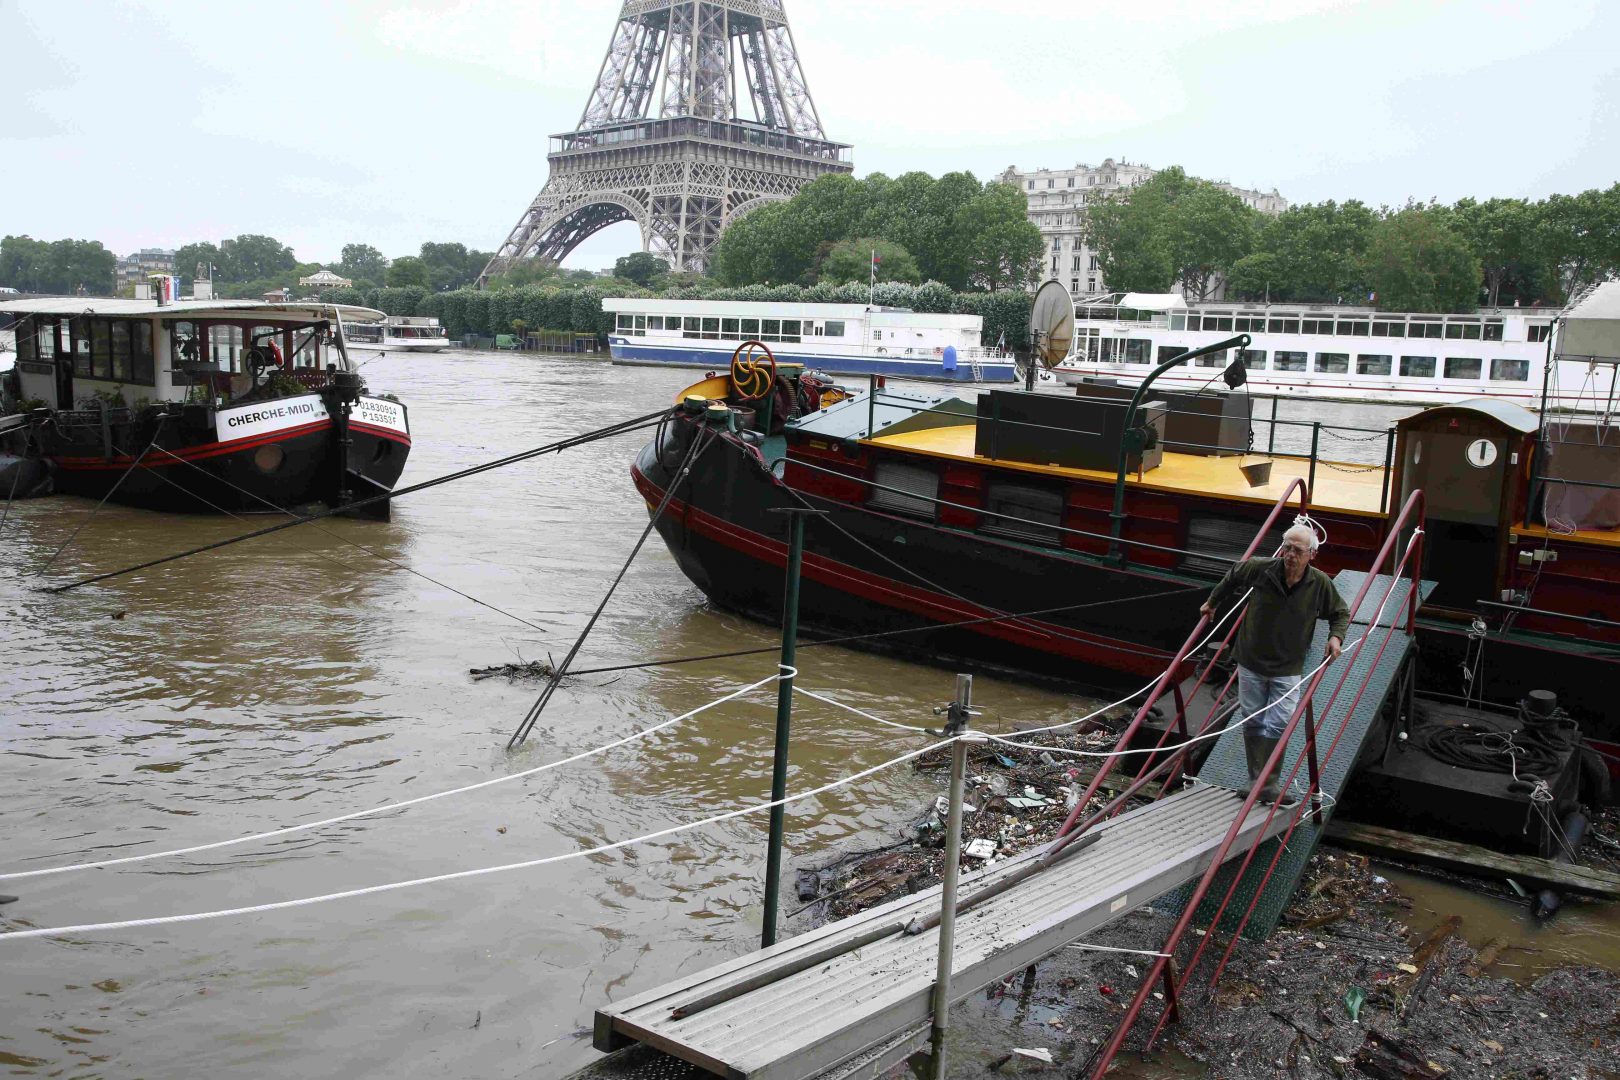 A man uses a footbridge as he leaves his houseboat moored near the Eiffel tower during flooding on the banks of the Seine River in Paris, France, after days of almost non-stop rain caused flooding in the country, June 2, 2016. REUTERS/Pascal Rossignol